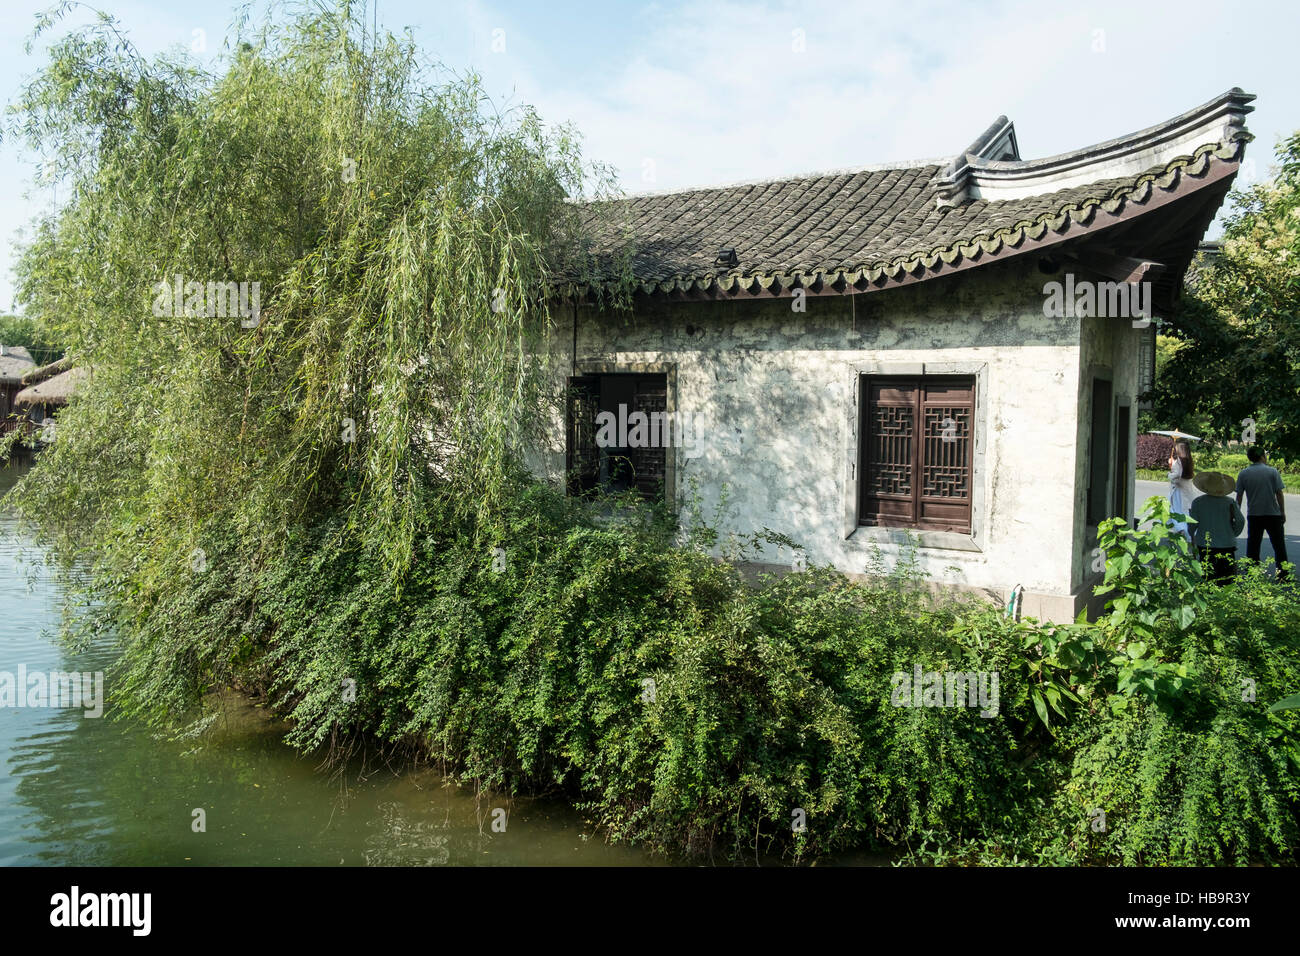 Ancient house near the river in Wuzhen town, Zhejiang province, China Stock Photo